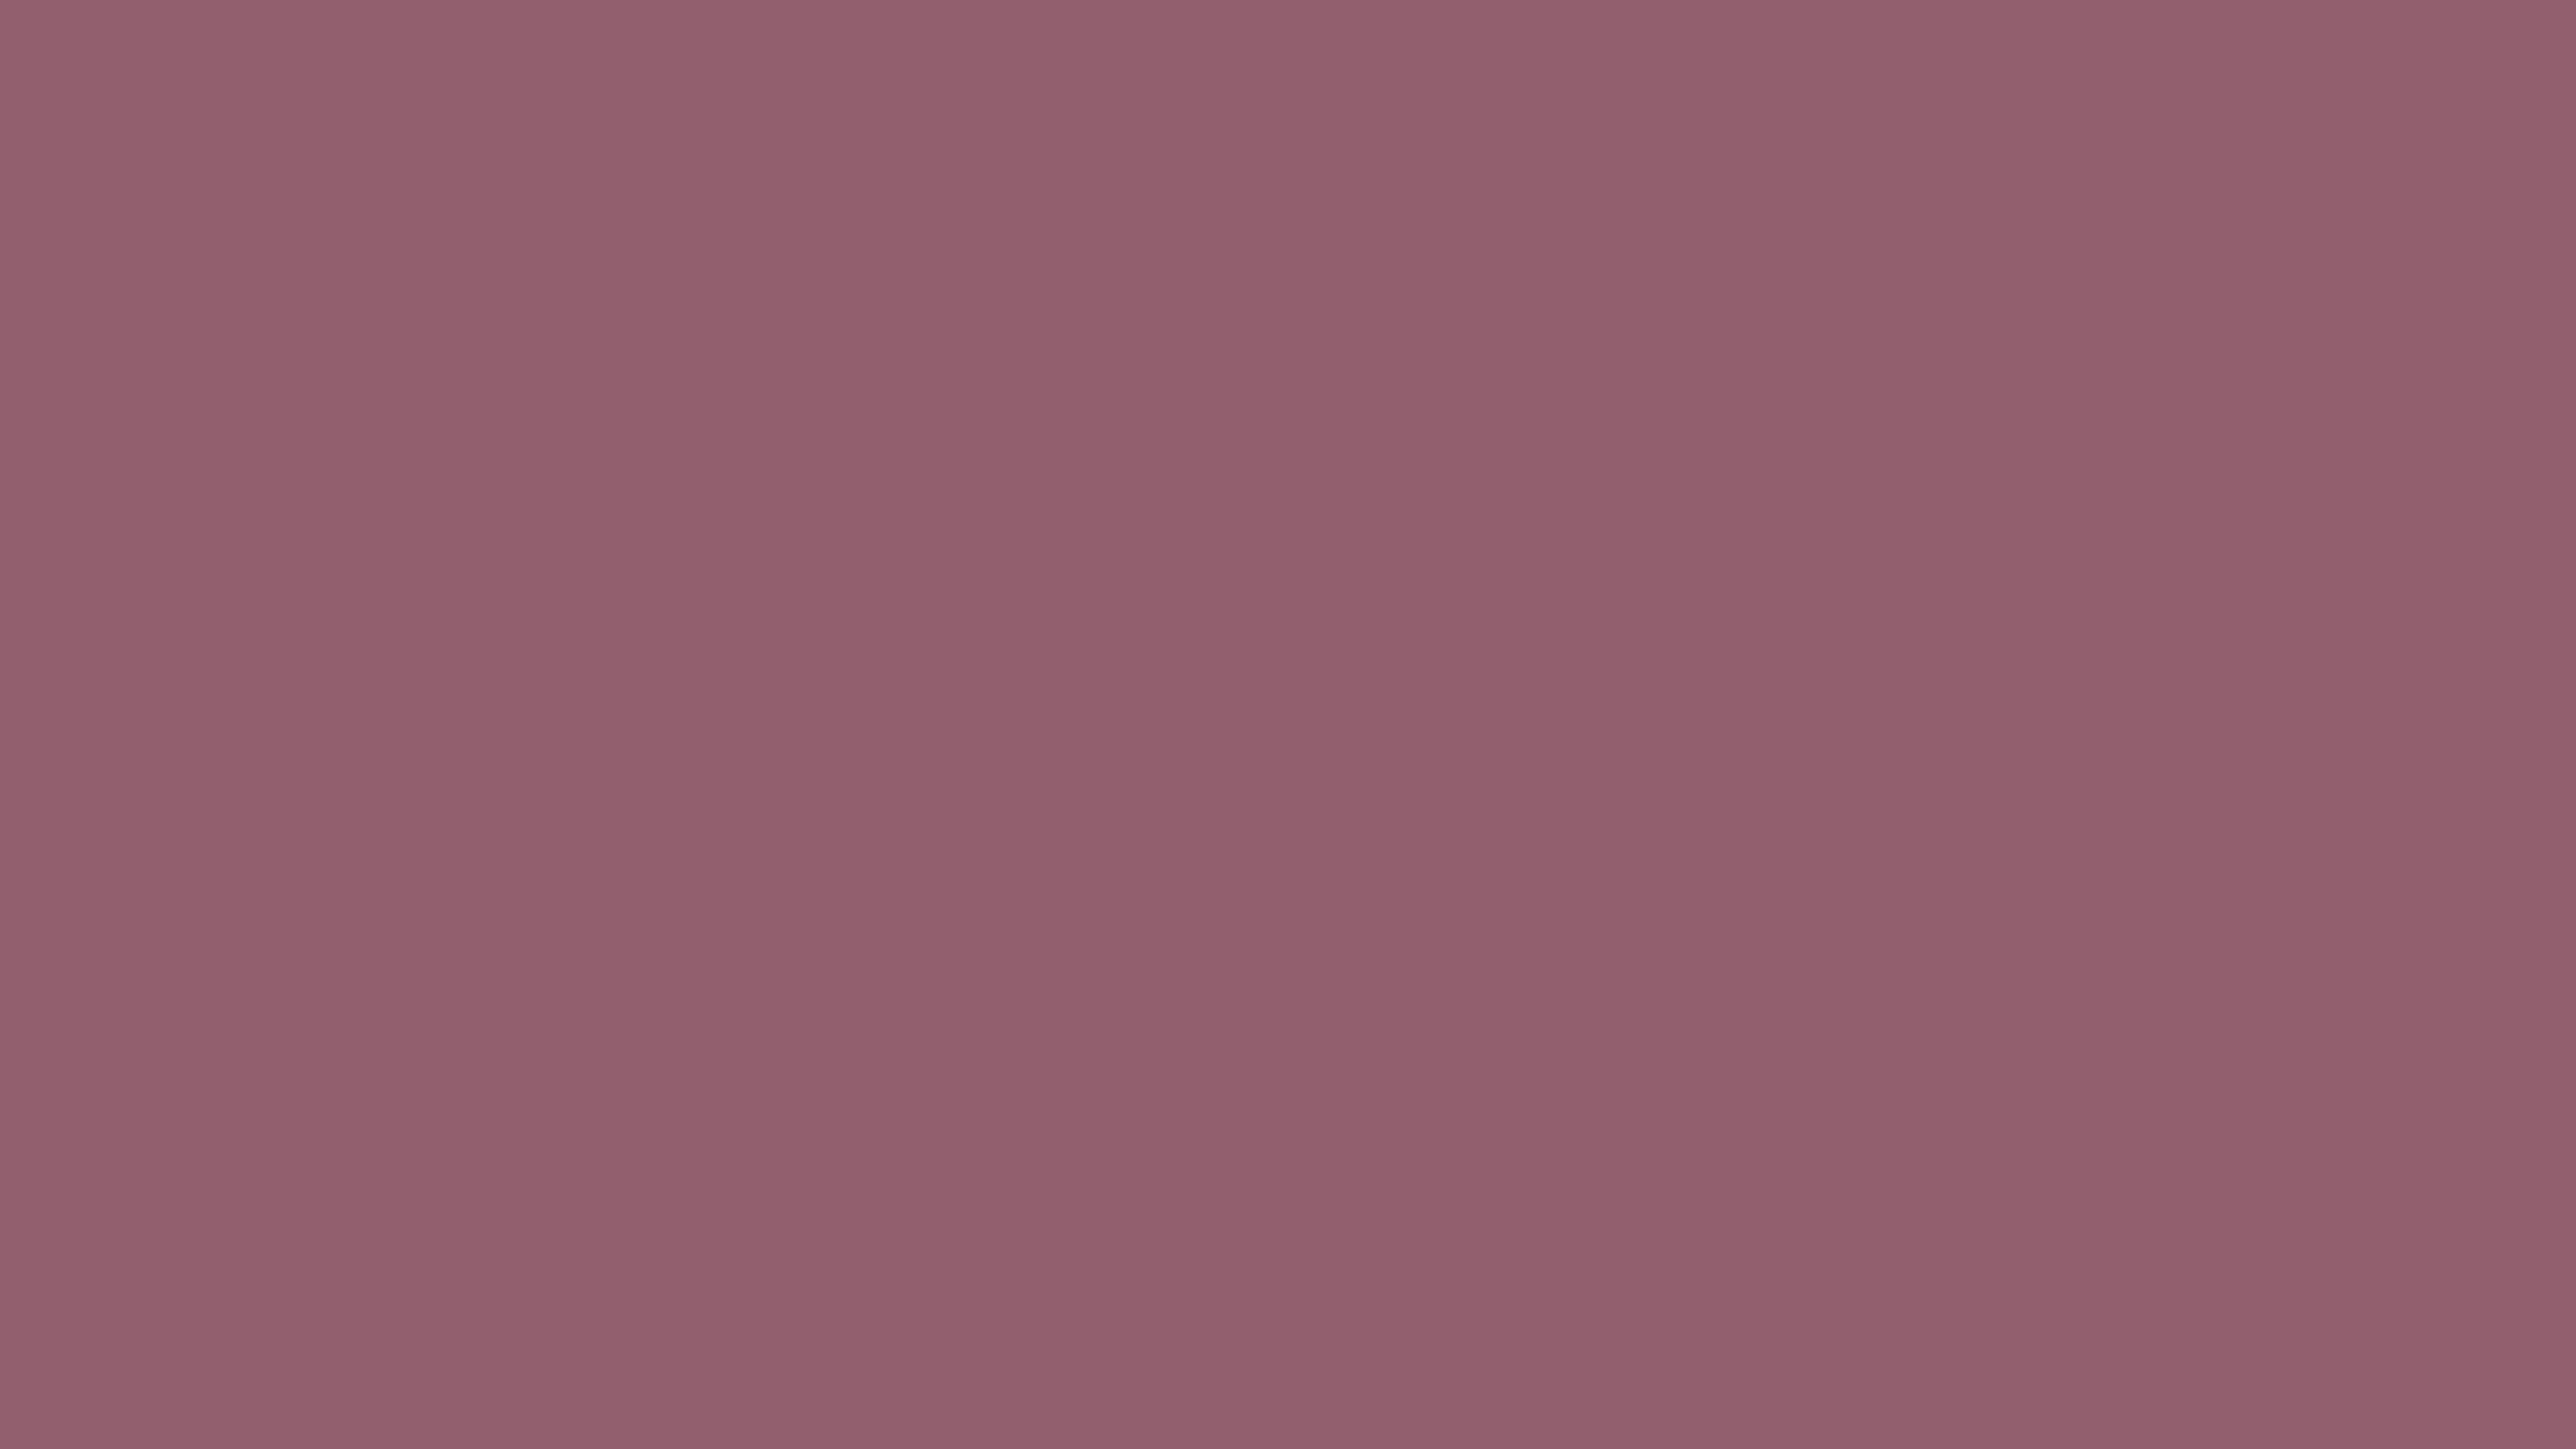 7680x4320 Mauve Taupe Solid Color Background